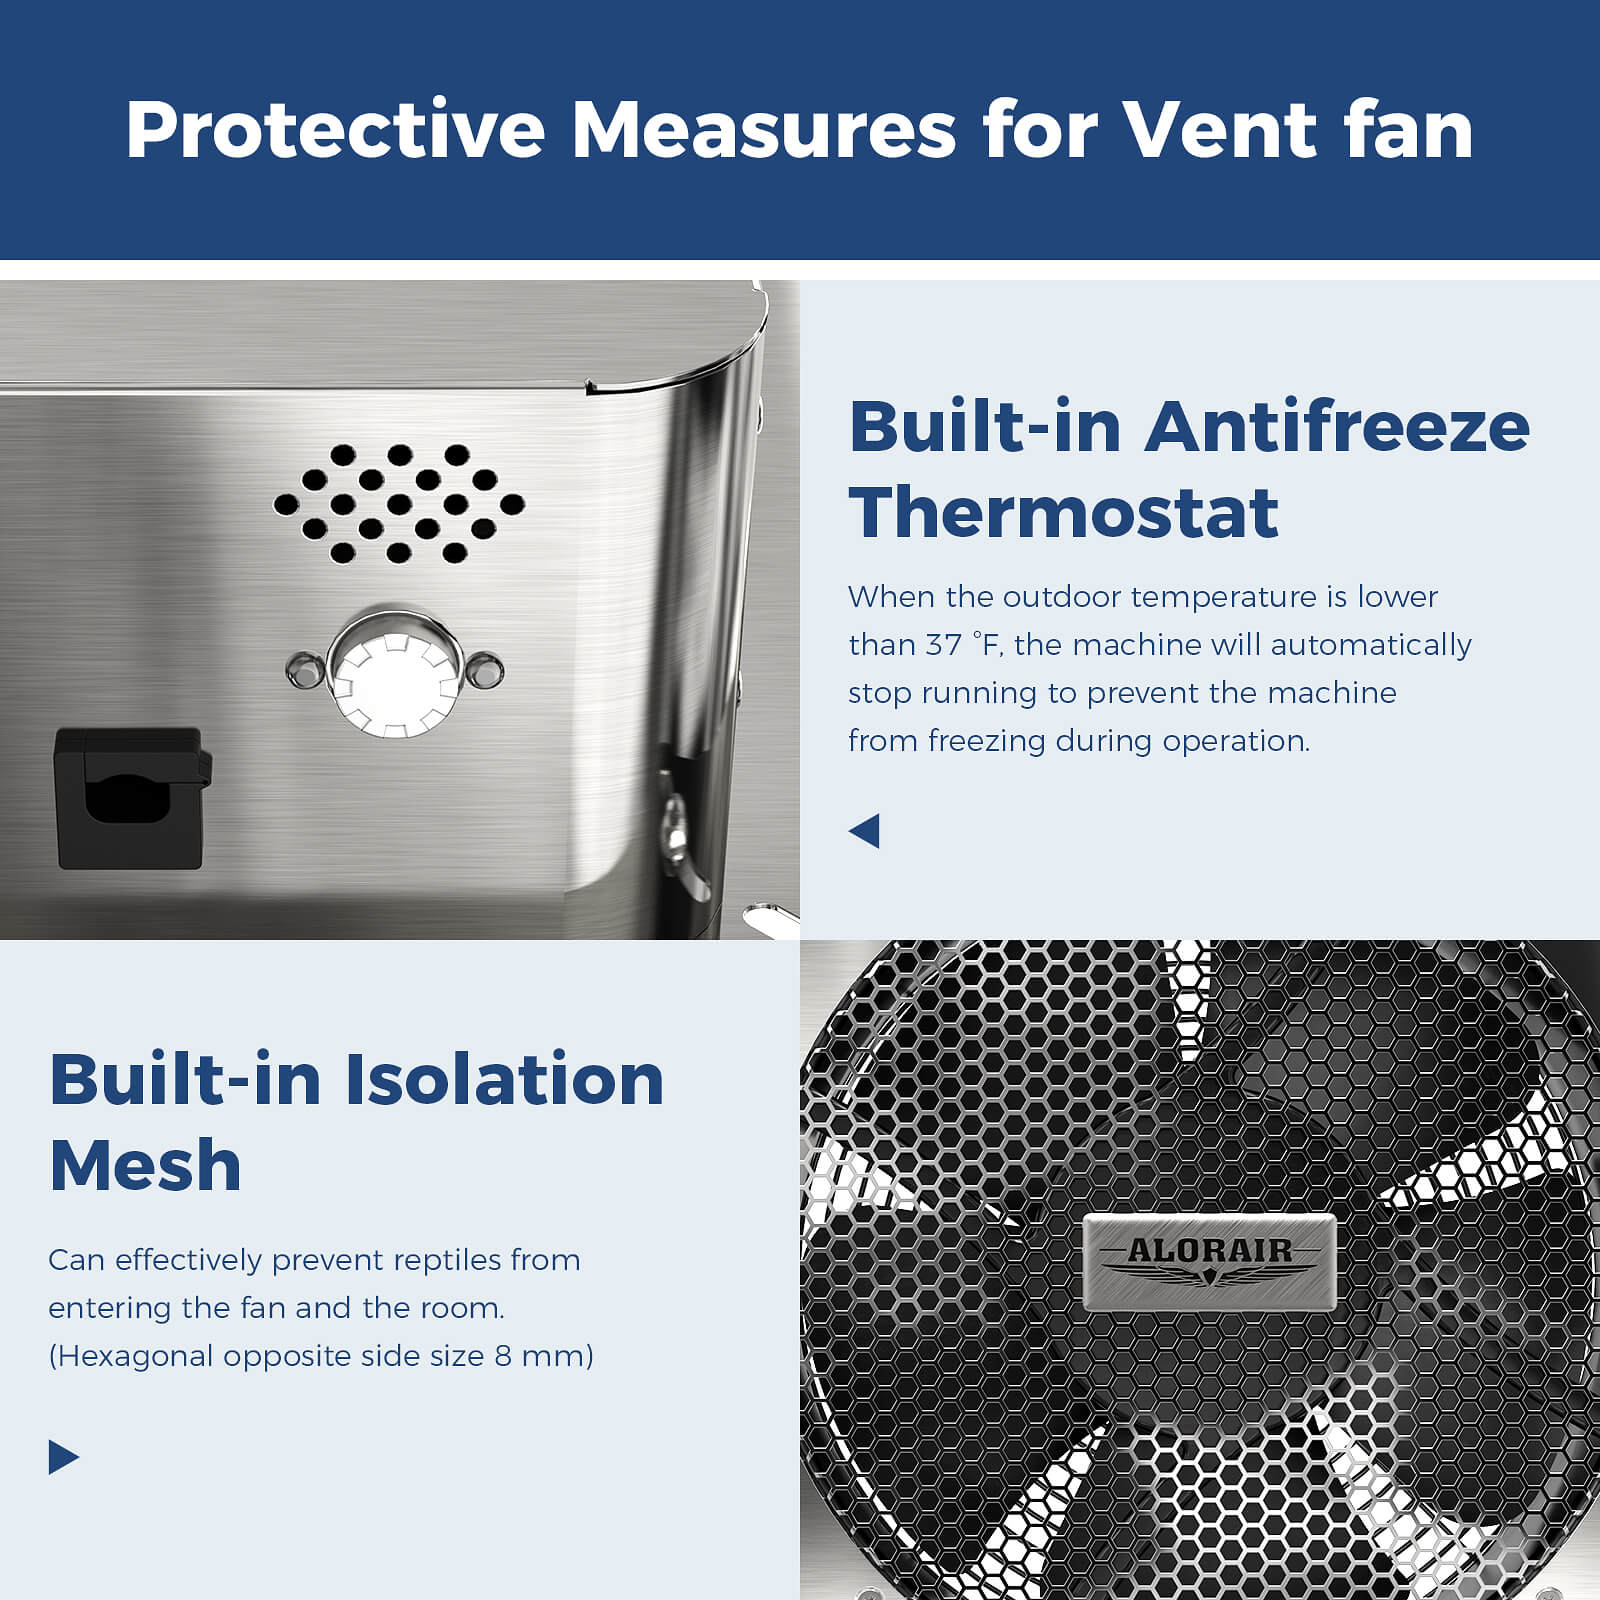 AlorAir 780CFM Stainless Steel Crawl Space Fan IP55 Rated Ventilation Fan with Thermostat, Built-In Isolation Net 9.13 Inch Foundation Vent Fan for Garage, ETL AlorAir